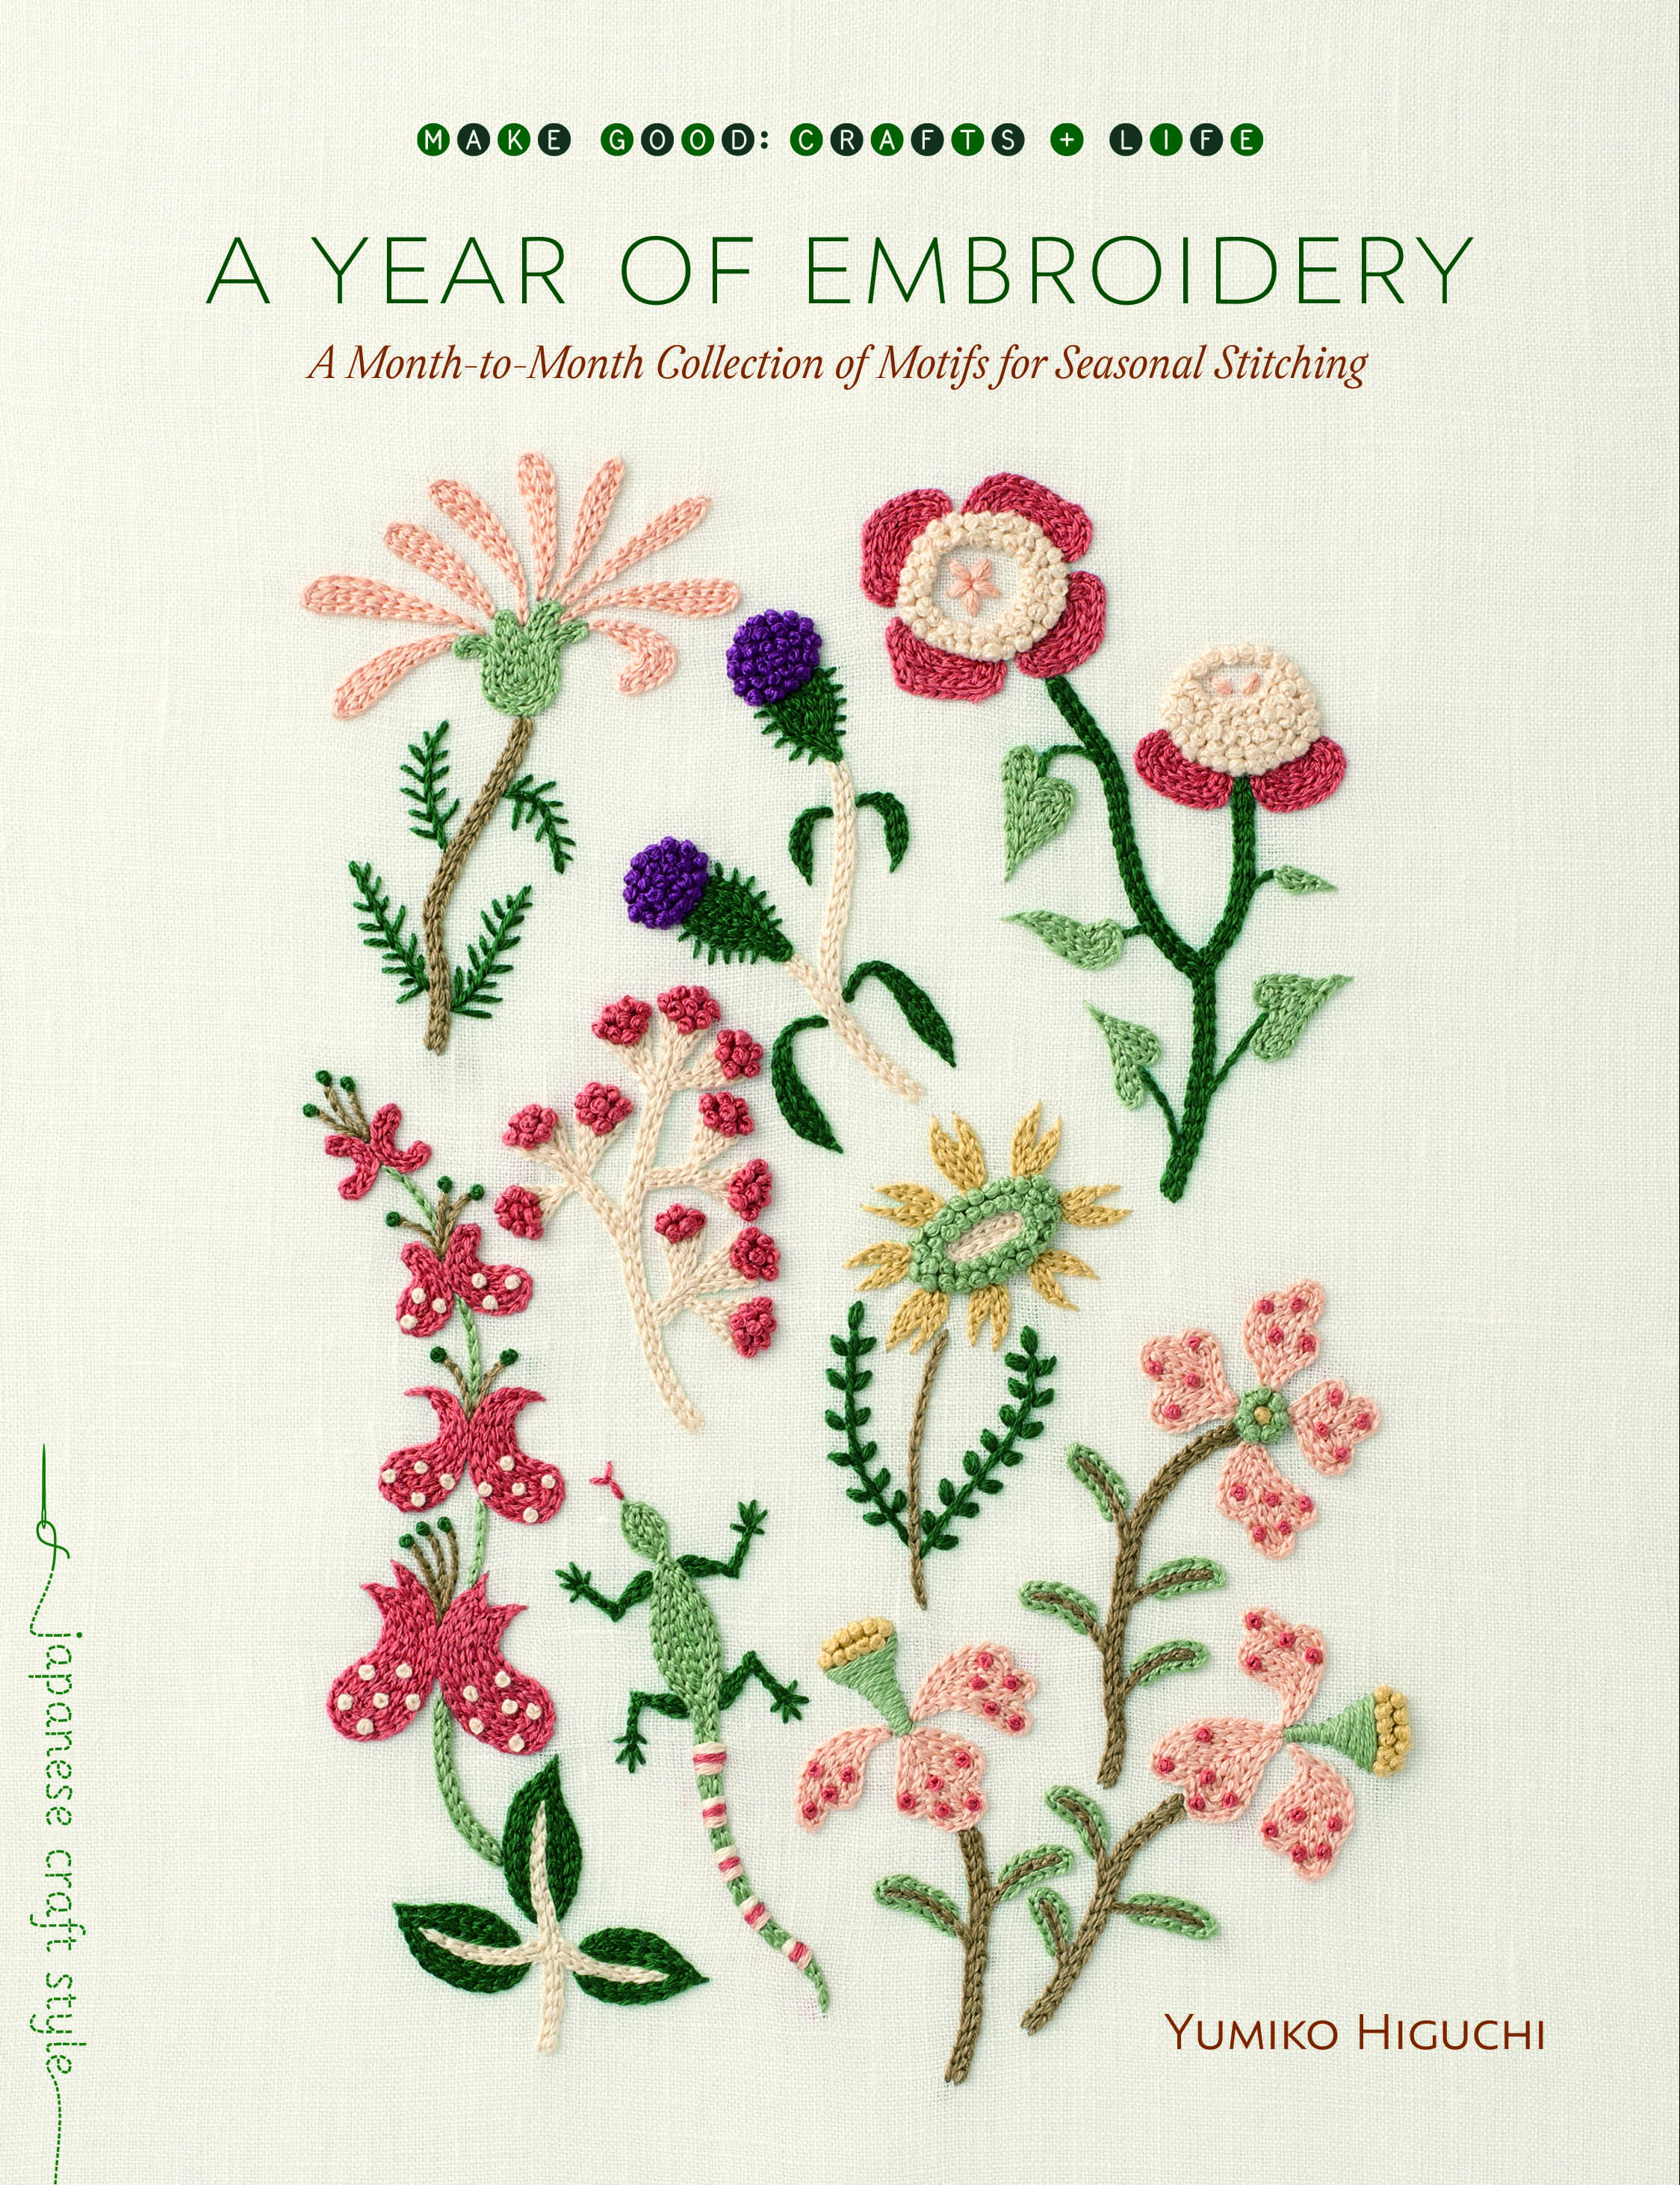 Fun Embroidery Patterns Diy Floral Cactus Embroidery Projects From A Year Of Embroidery